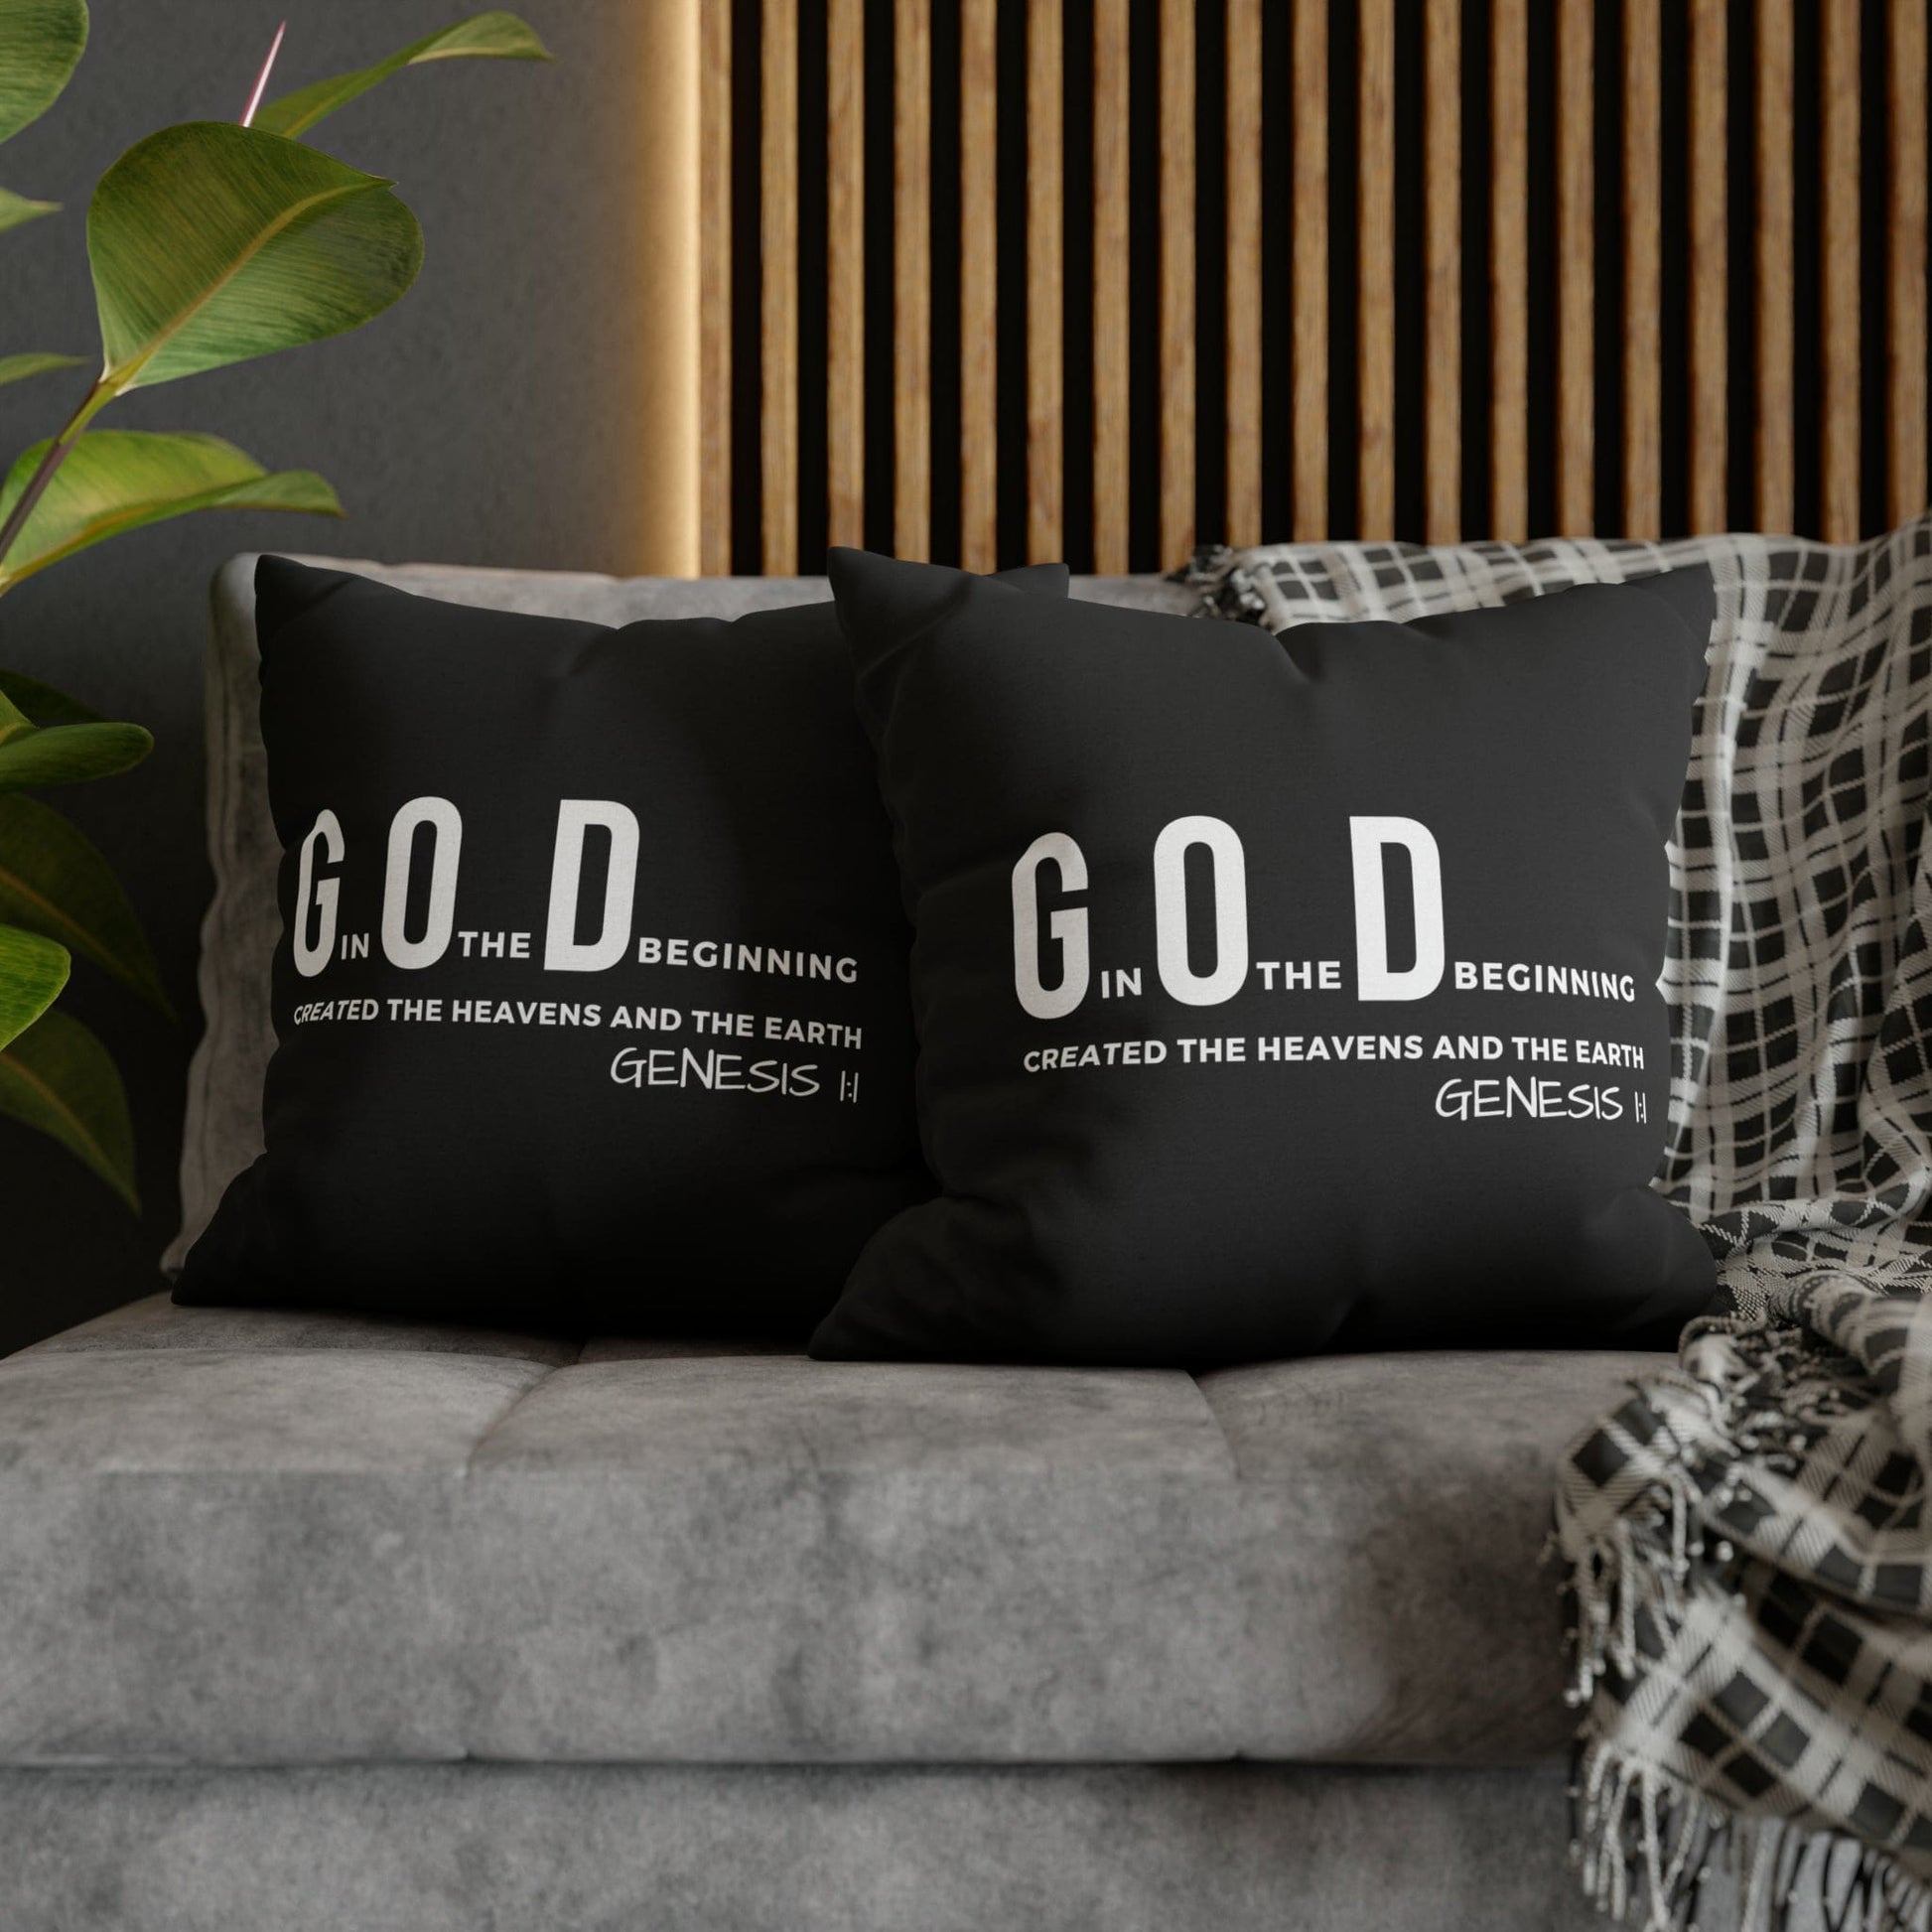 Decorative Throw Pillow Cover - Set Of 2, God In The Beginning Created The Heavens And The Earth - Scripture Verse-9